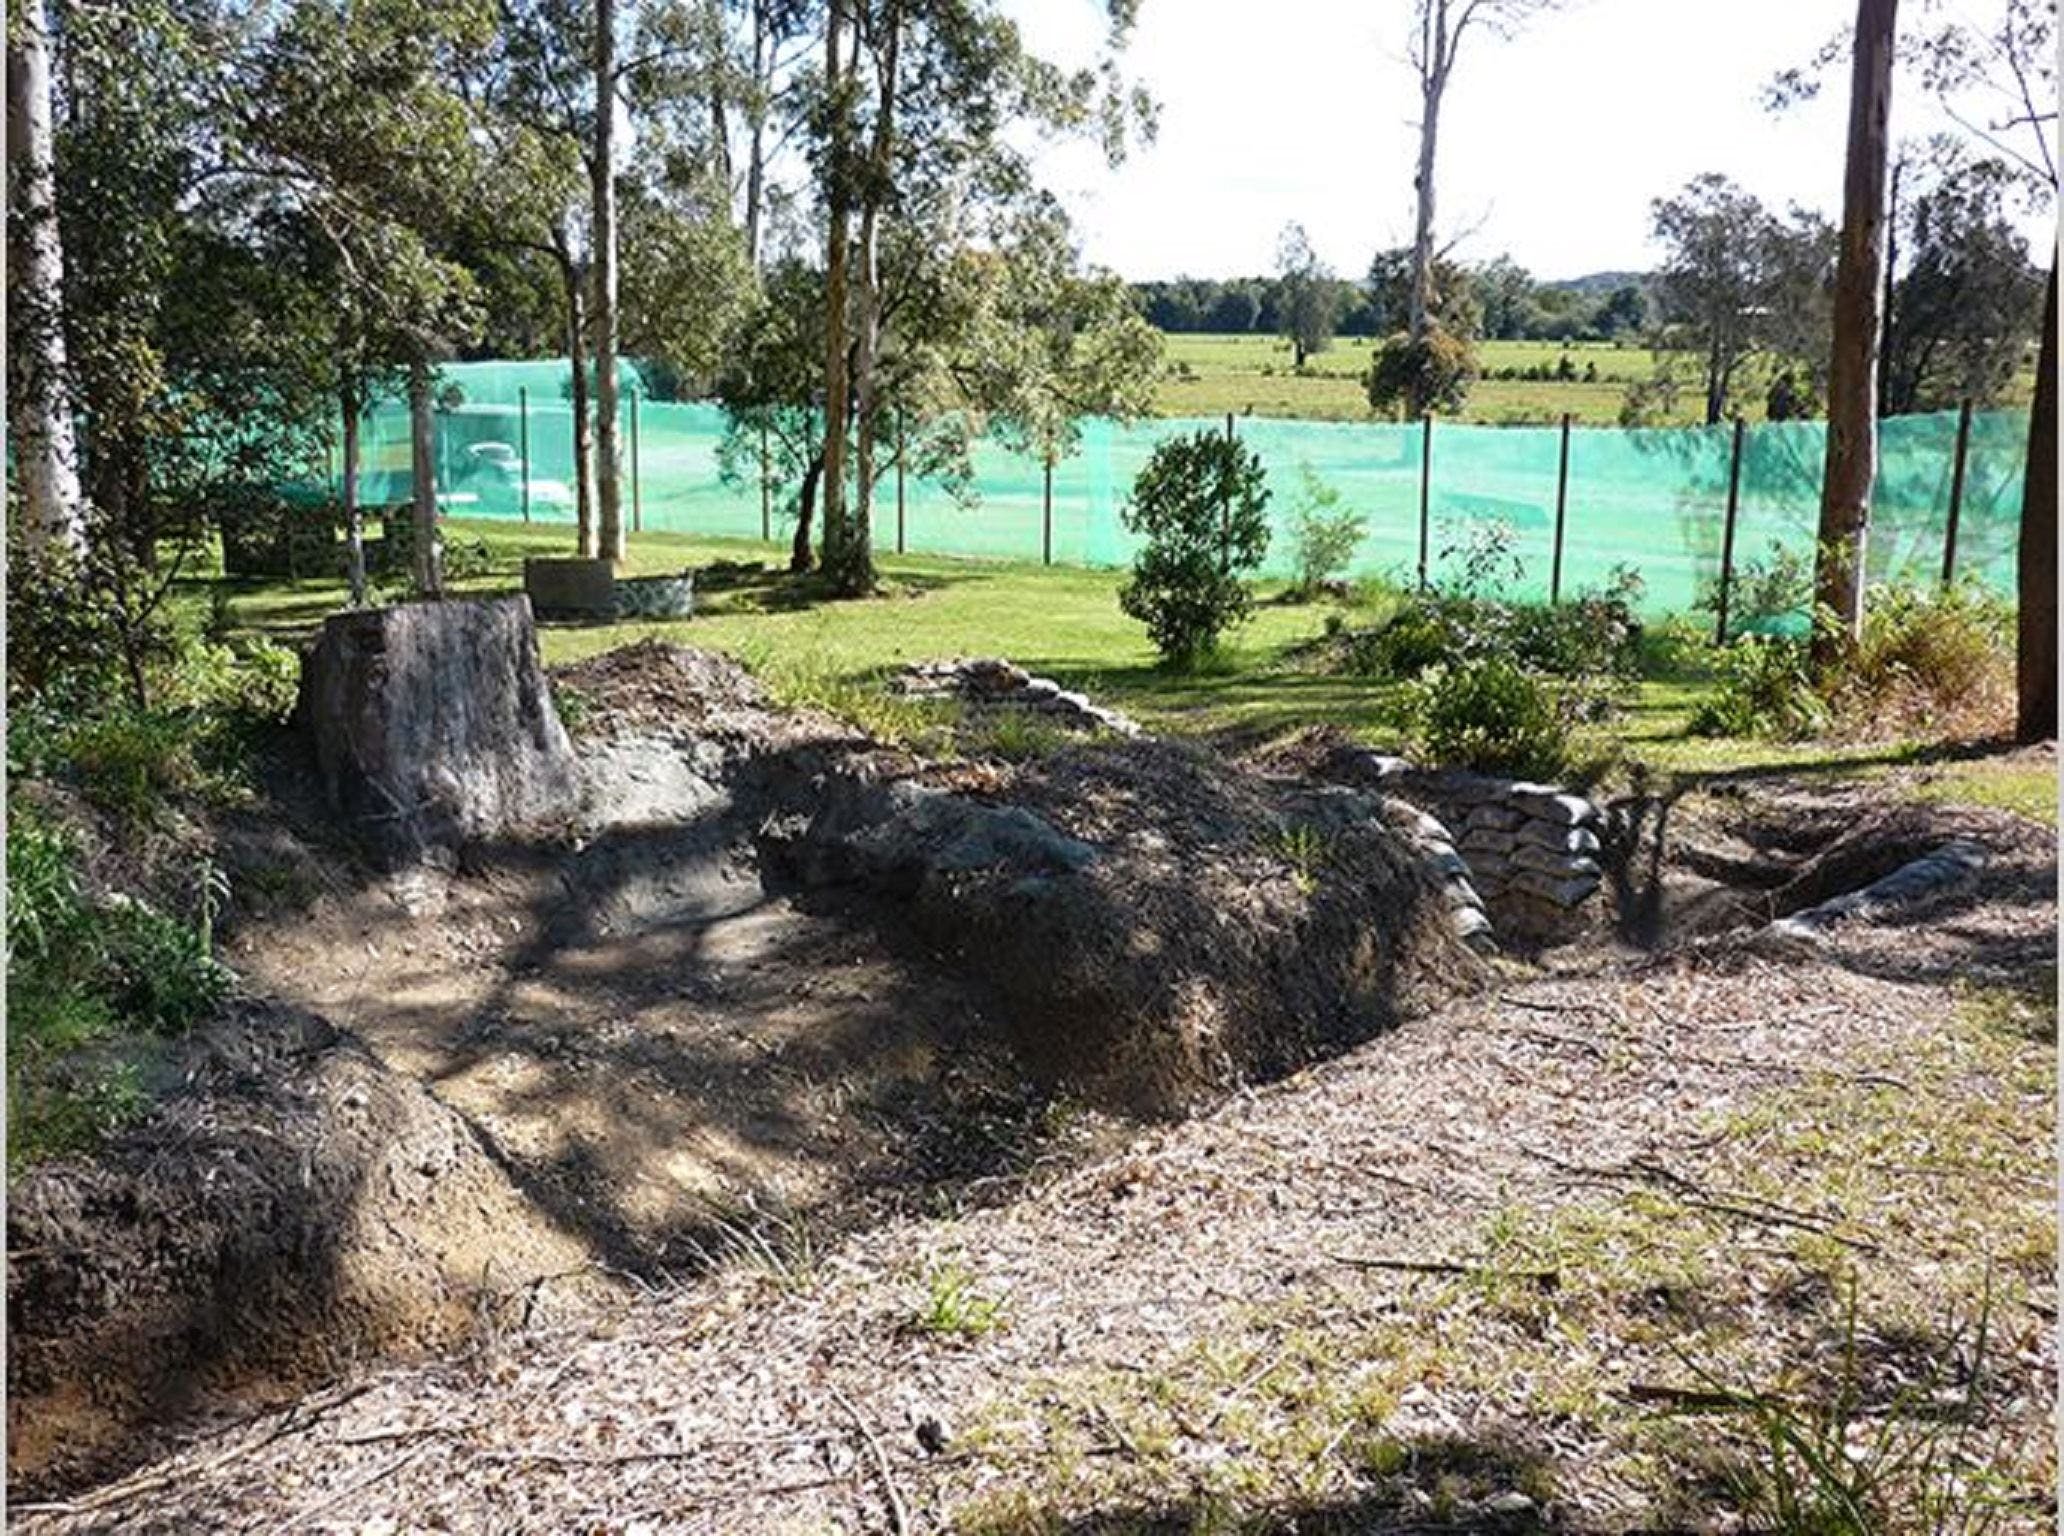 Tactical Paintball Games - Redcliffe Tourism